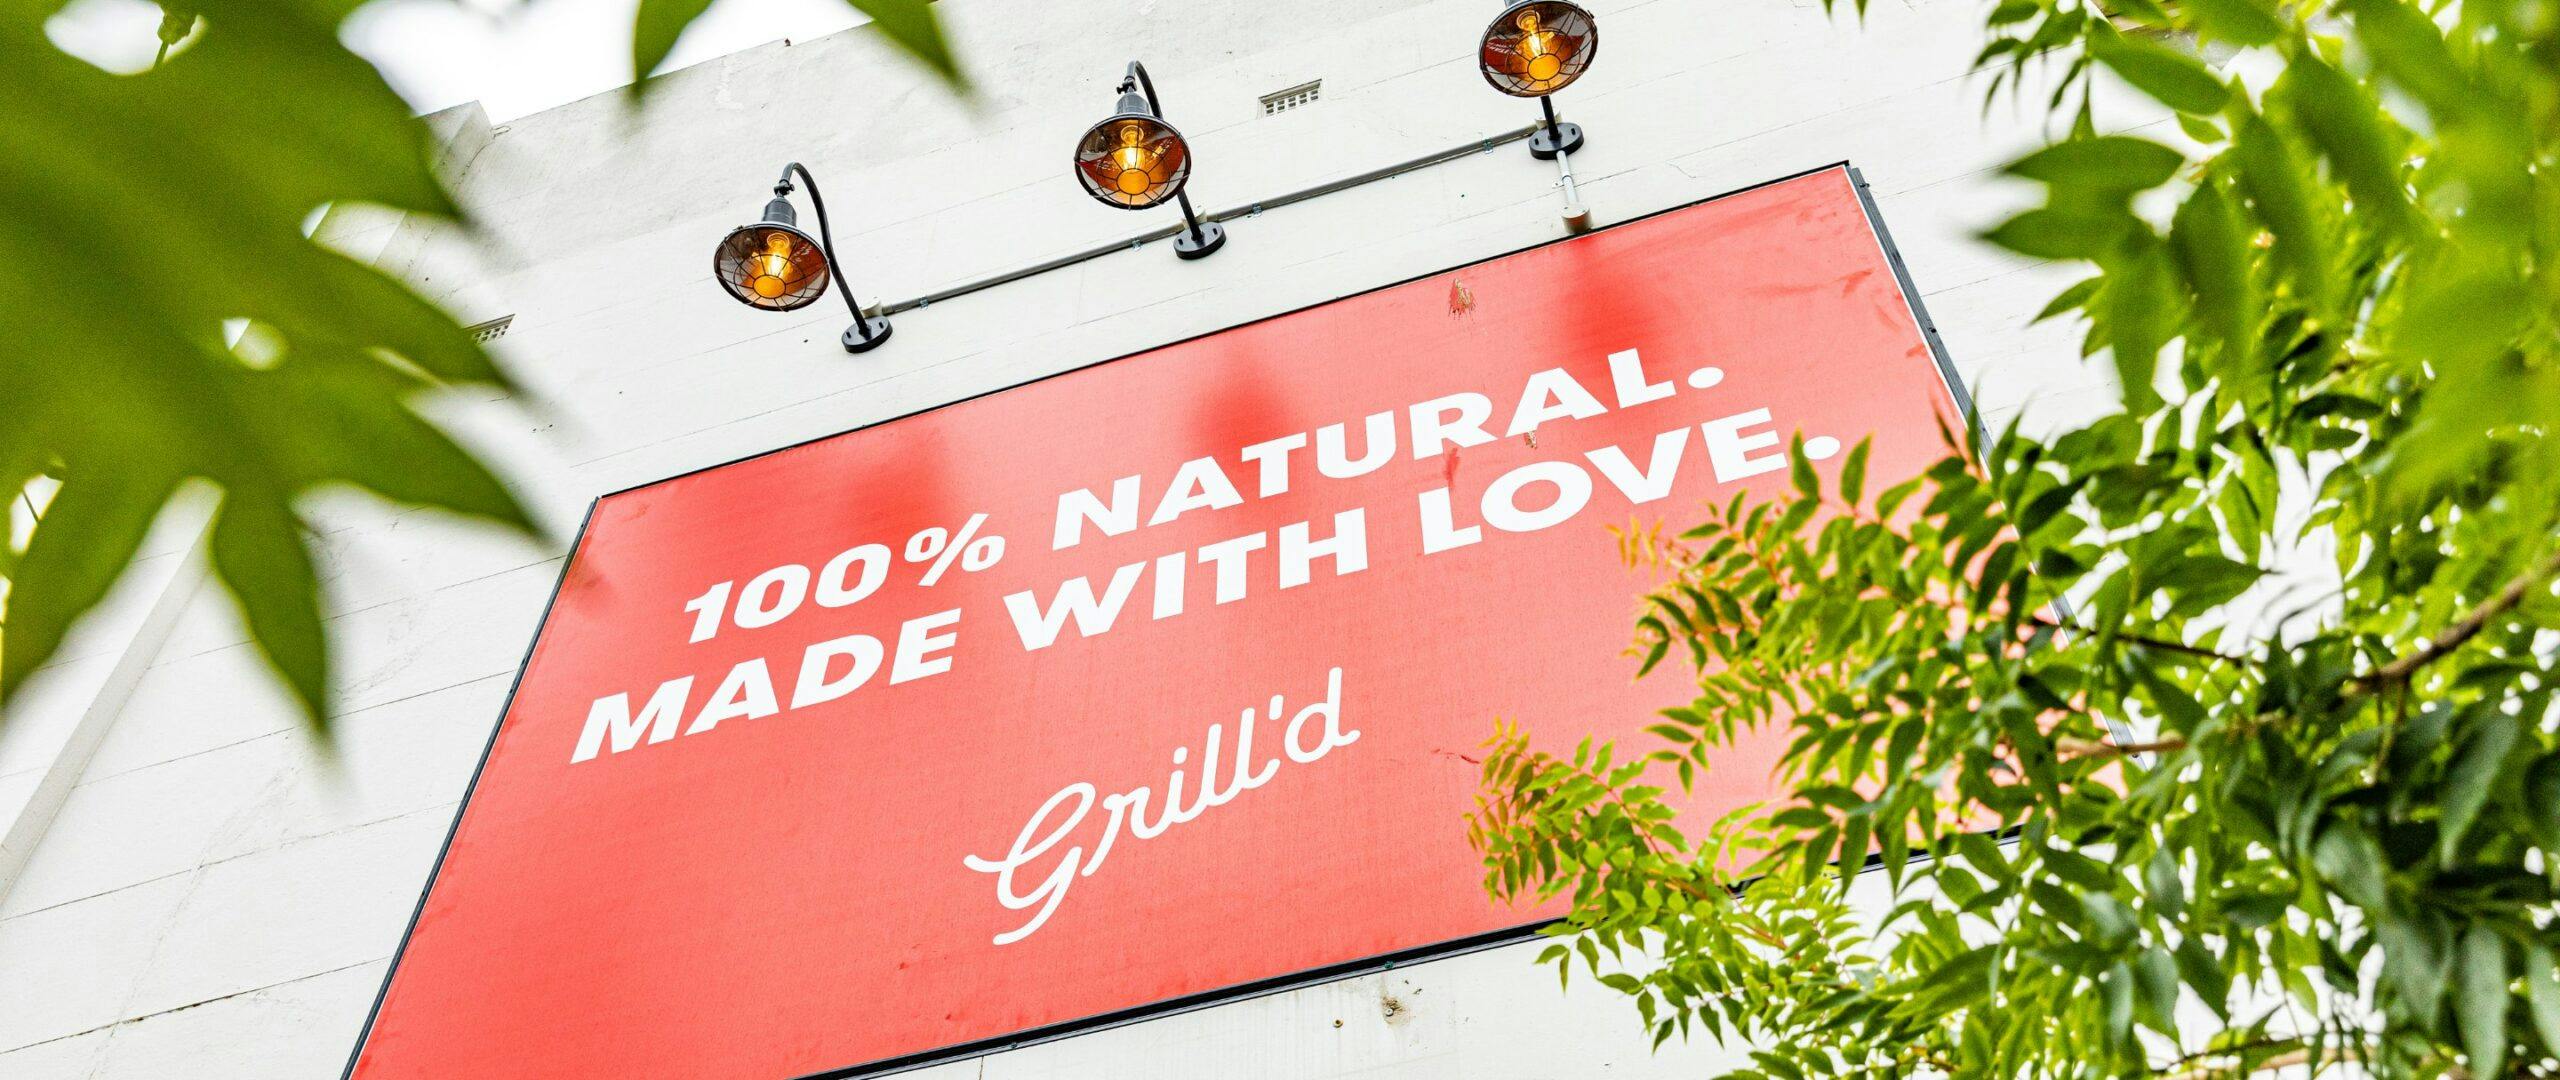 Grill'd billboard saying "100% natural made with love"